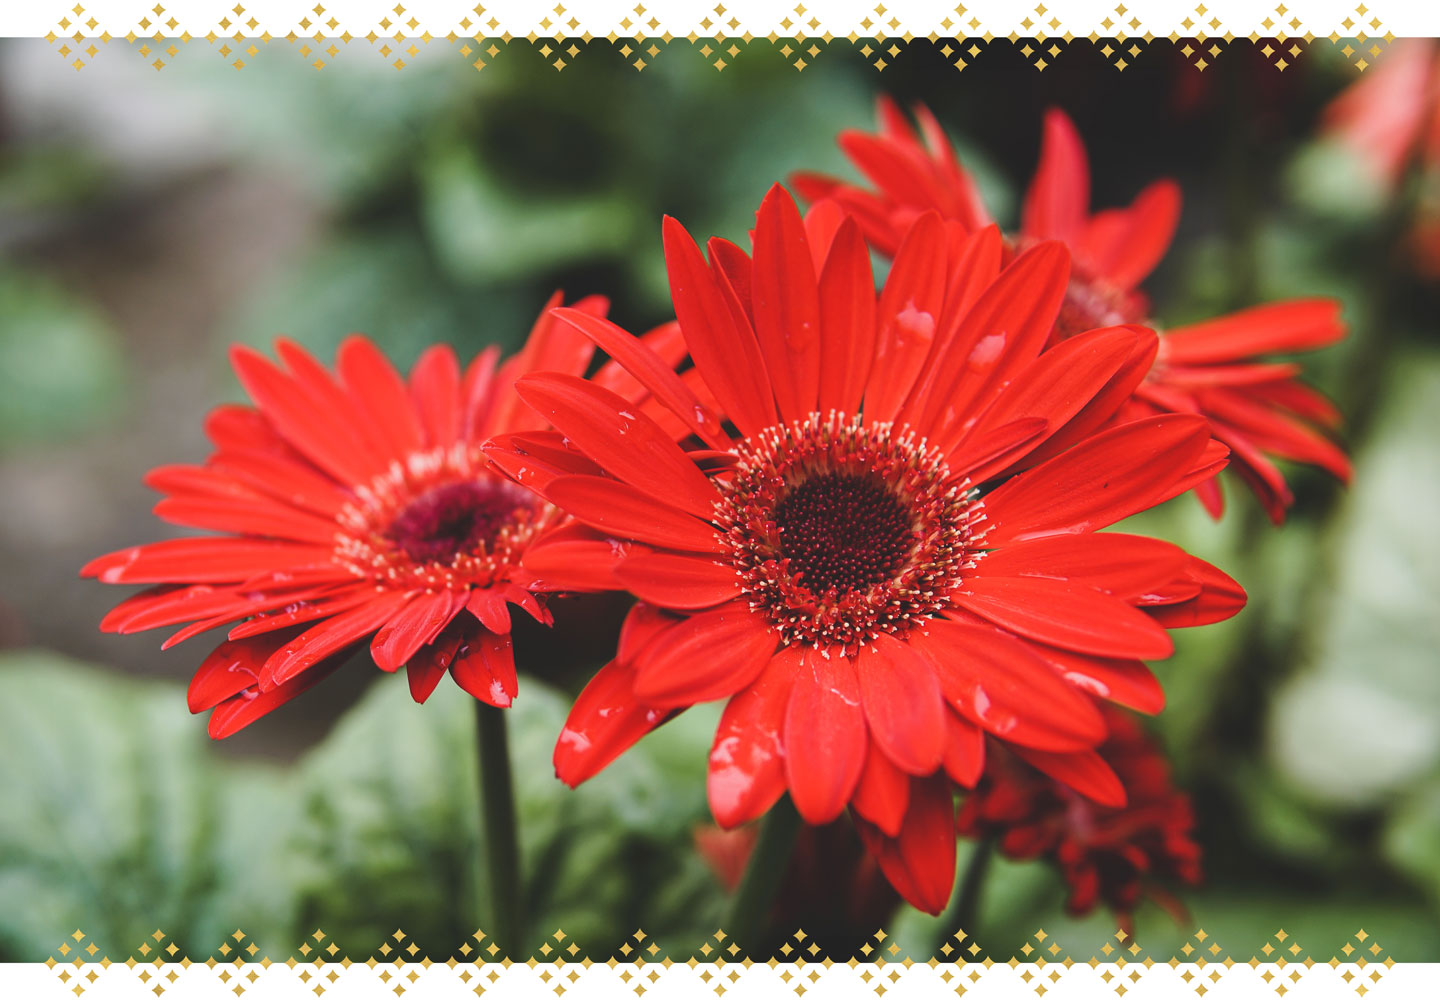 How to Plant and Take Care of Gerbera Daisies